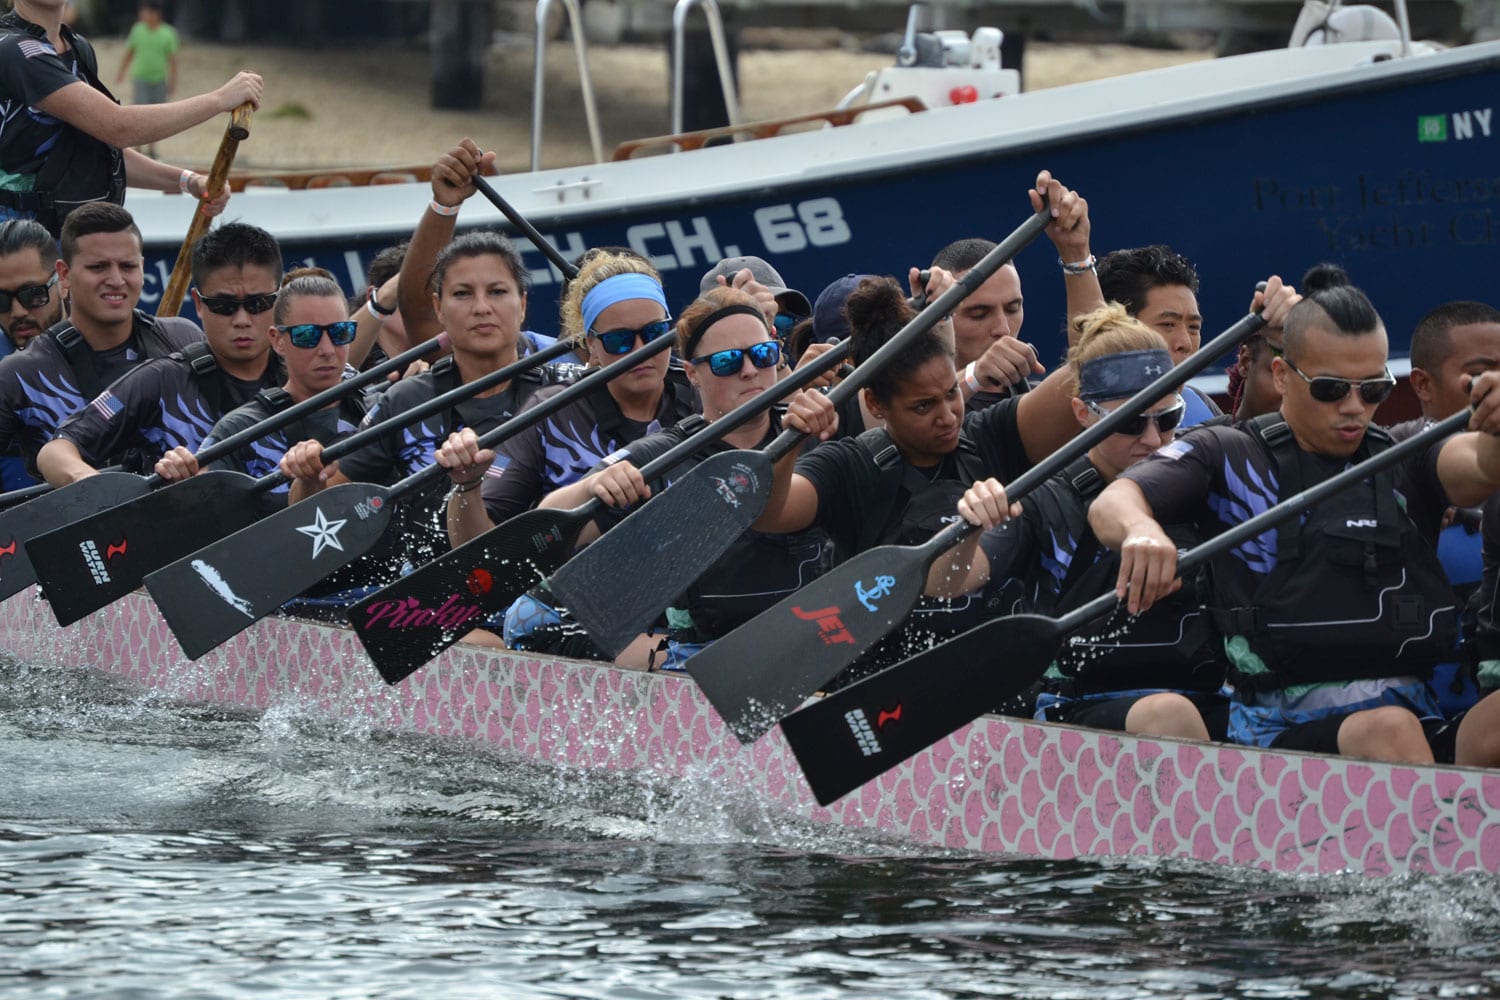 video: thousands flock to port jeff for dragon boat race